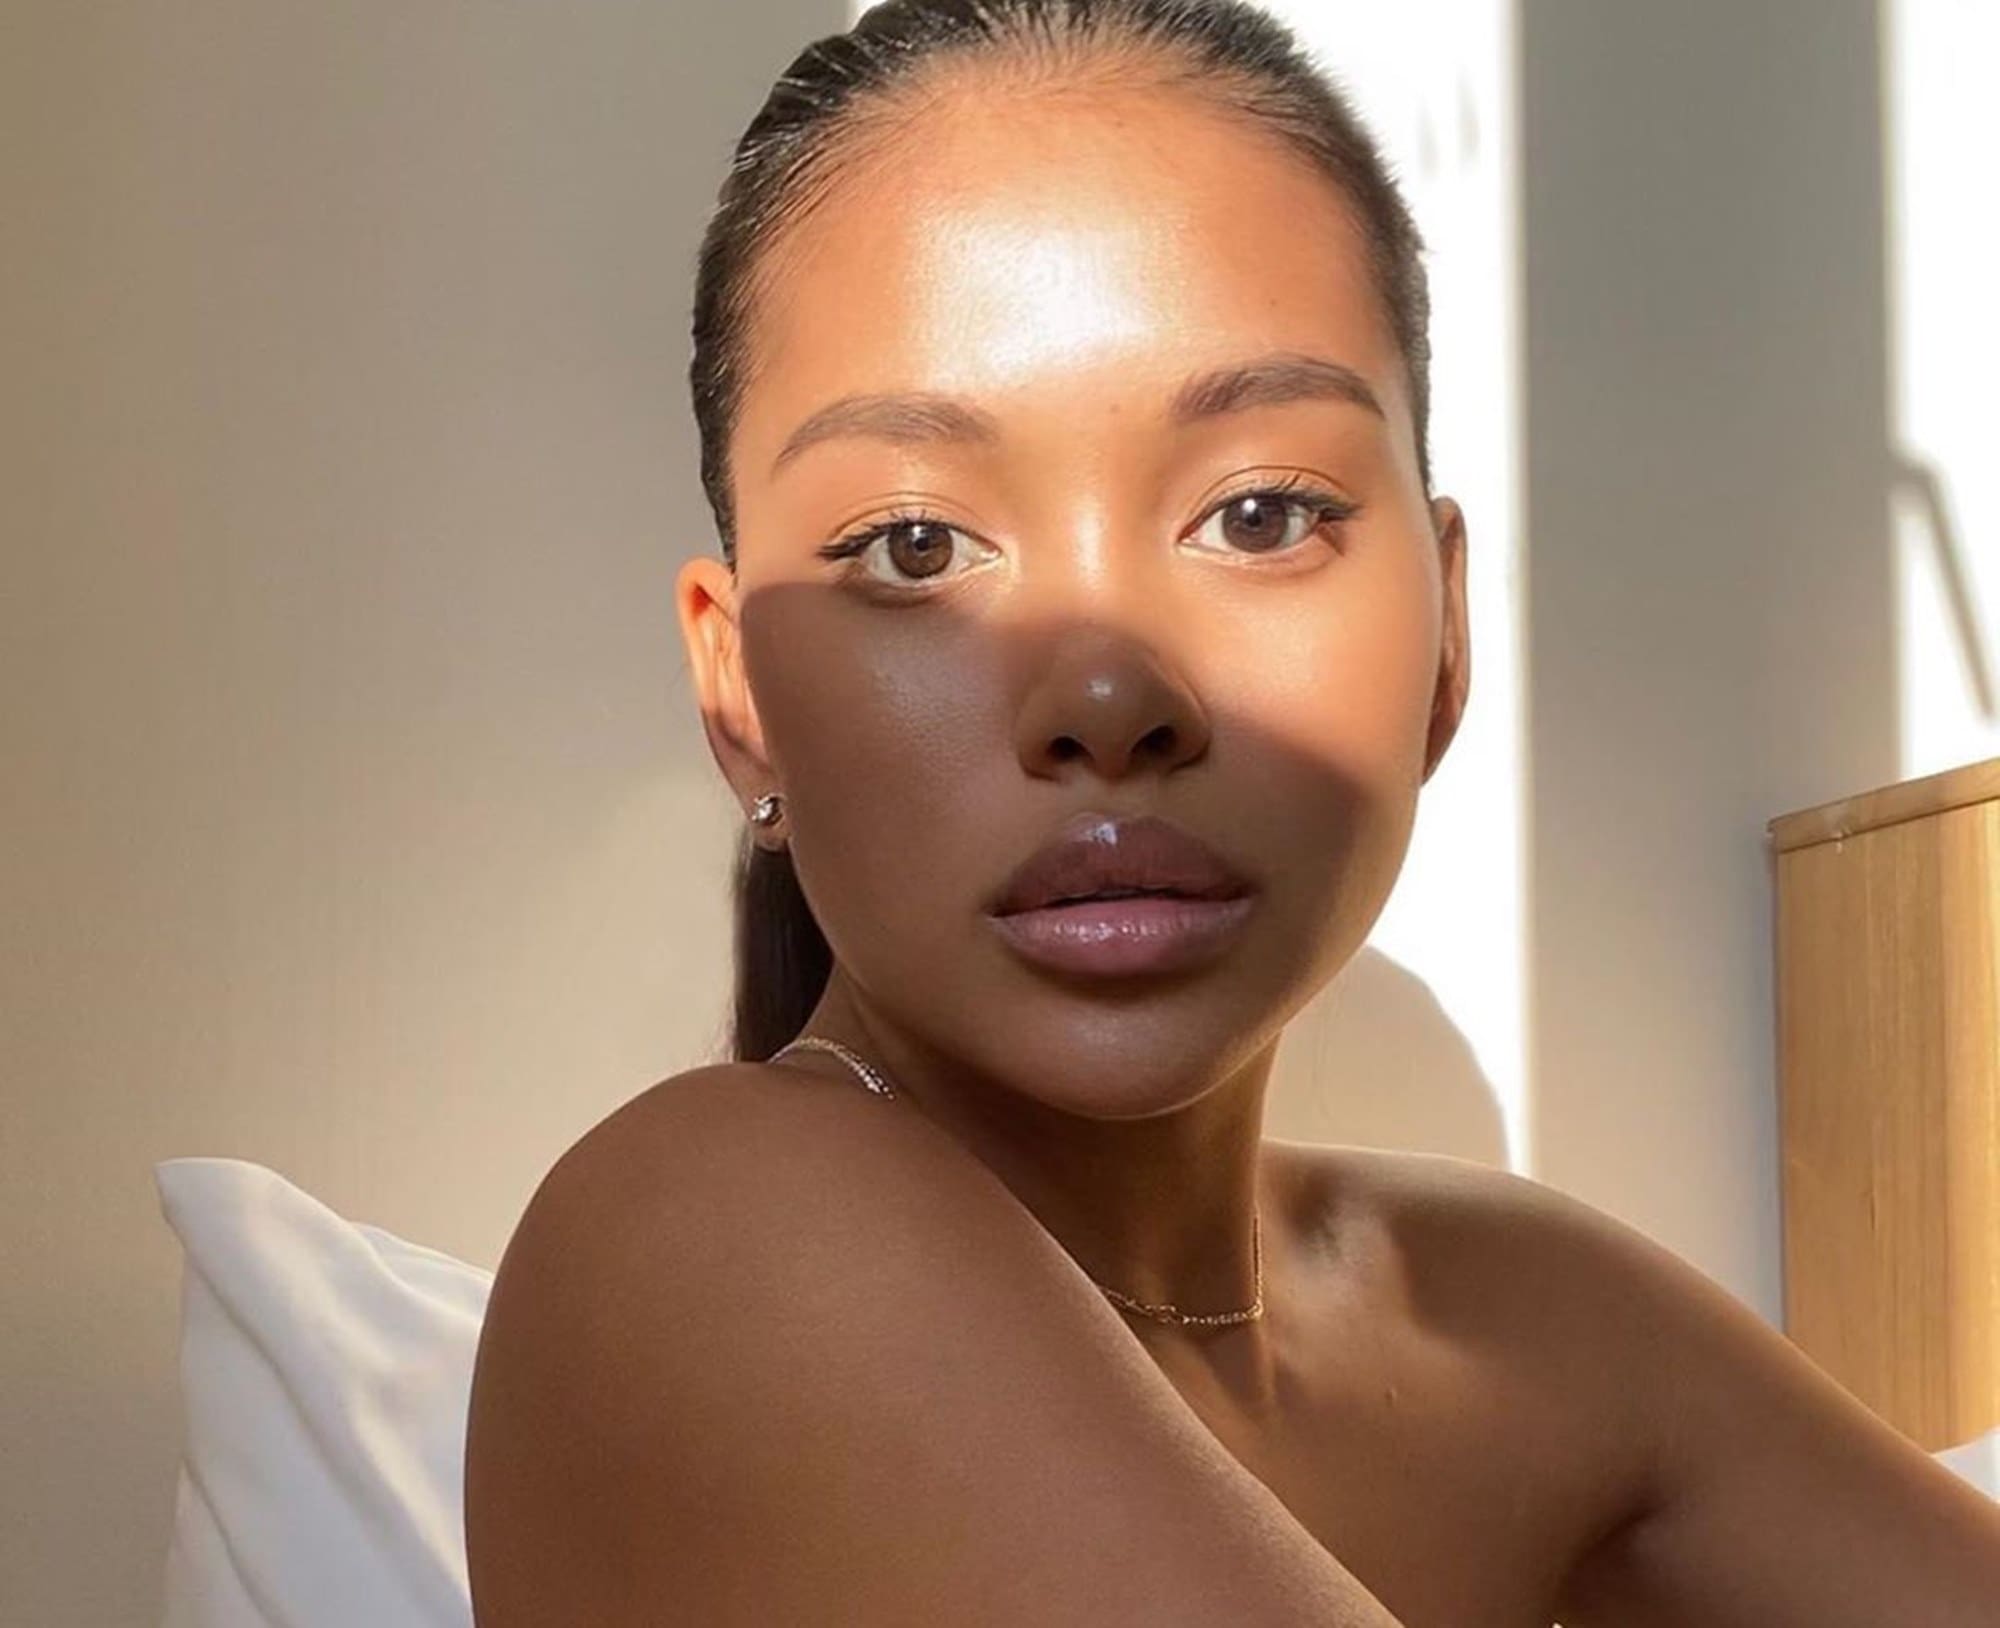 Ammika Harris' Latest Photo Has Fans Saying That She Should Have Been A Model